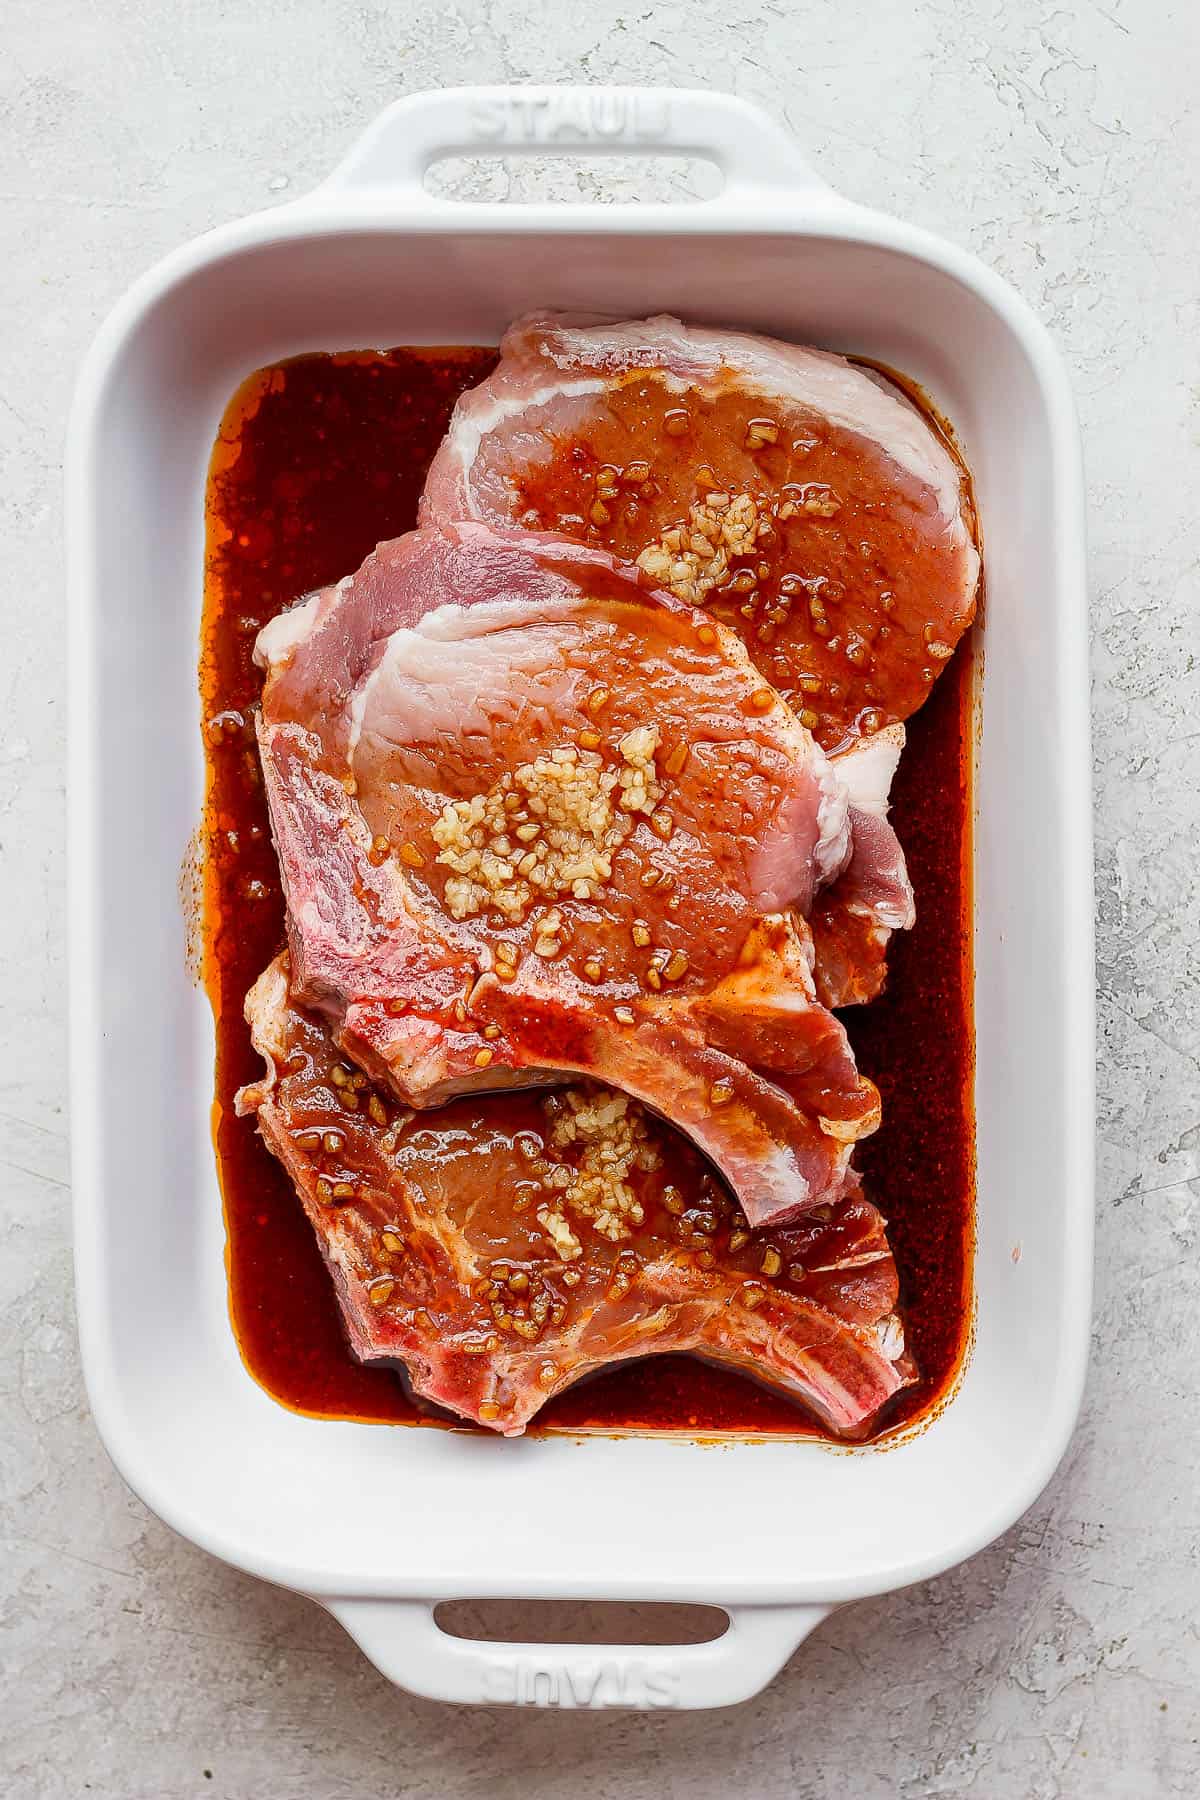 All-purpose marinade and pork chops in a shallow pan.